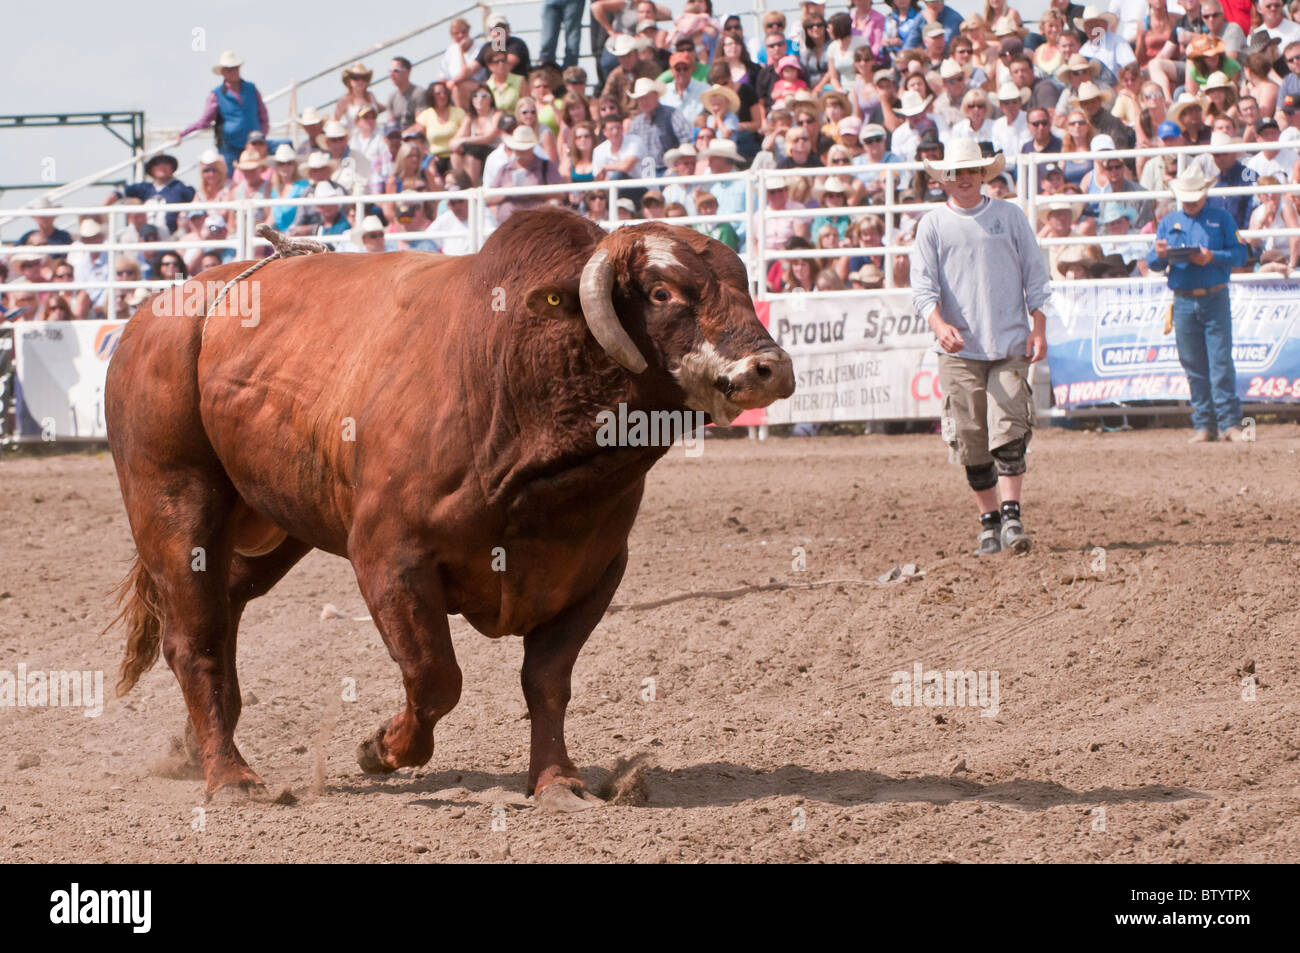 Bull after throwing a cowboy, Strathmore Heritage Days, Rodeo, Strathmore, Alberta, Canada Stock Photo